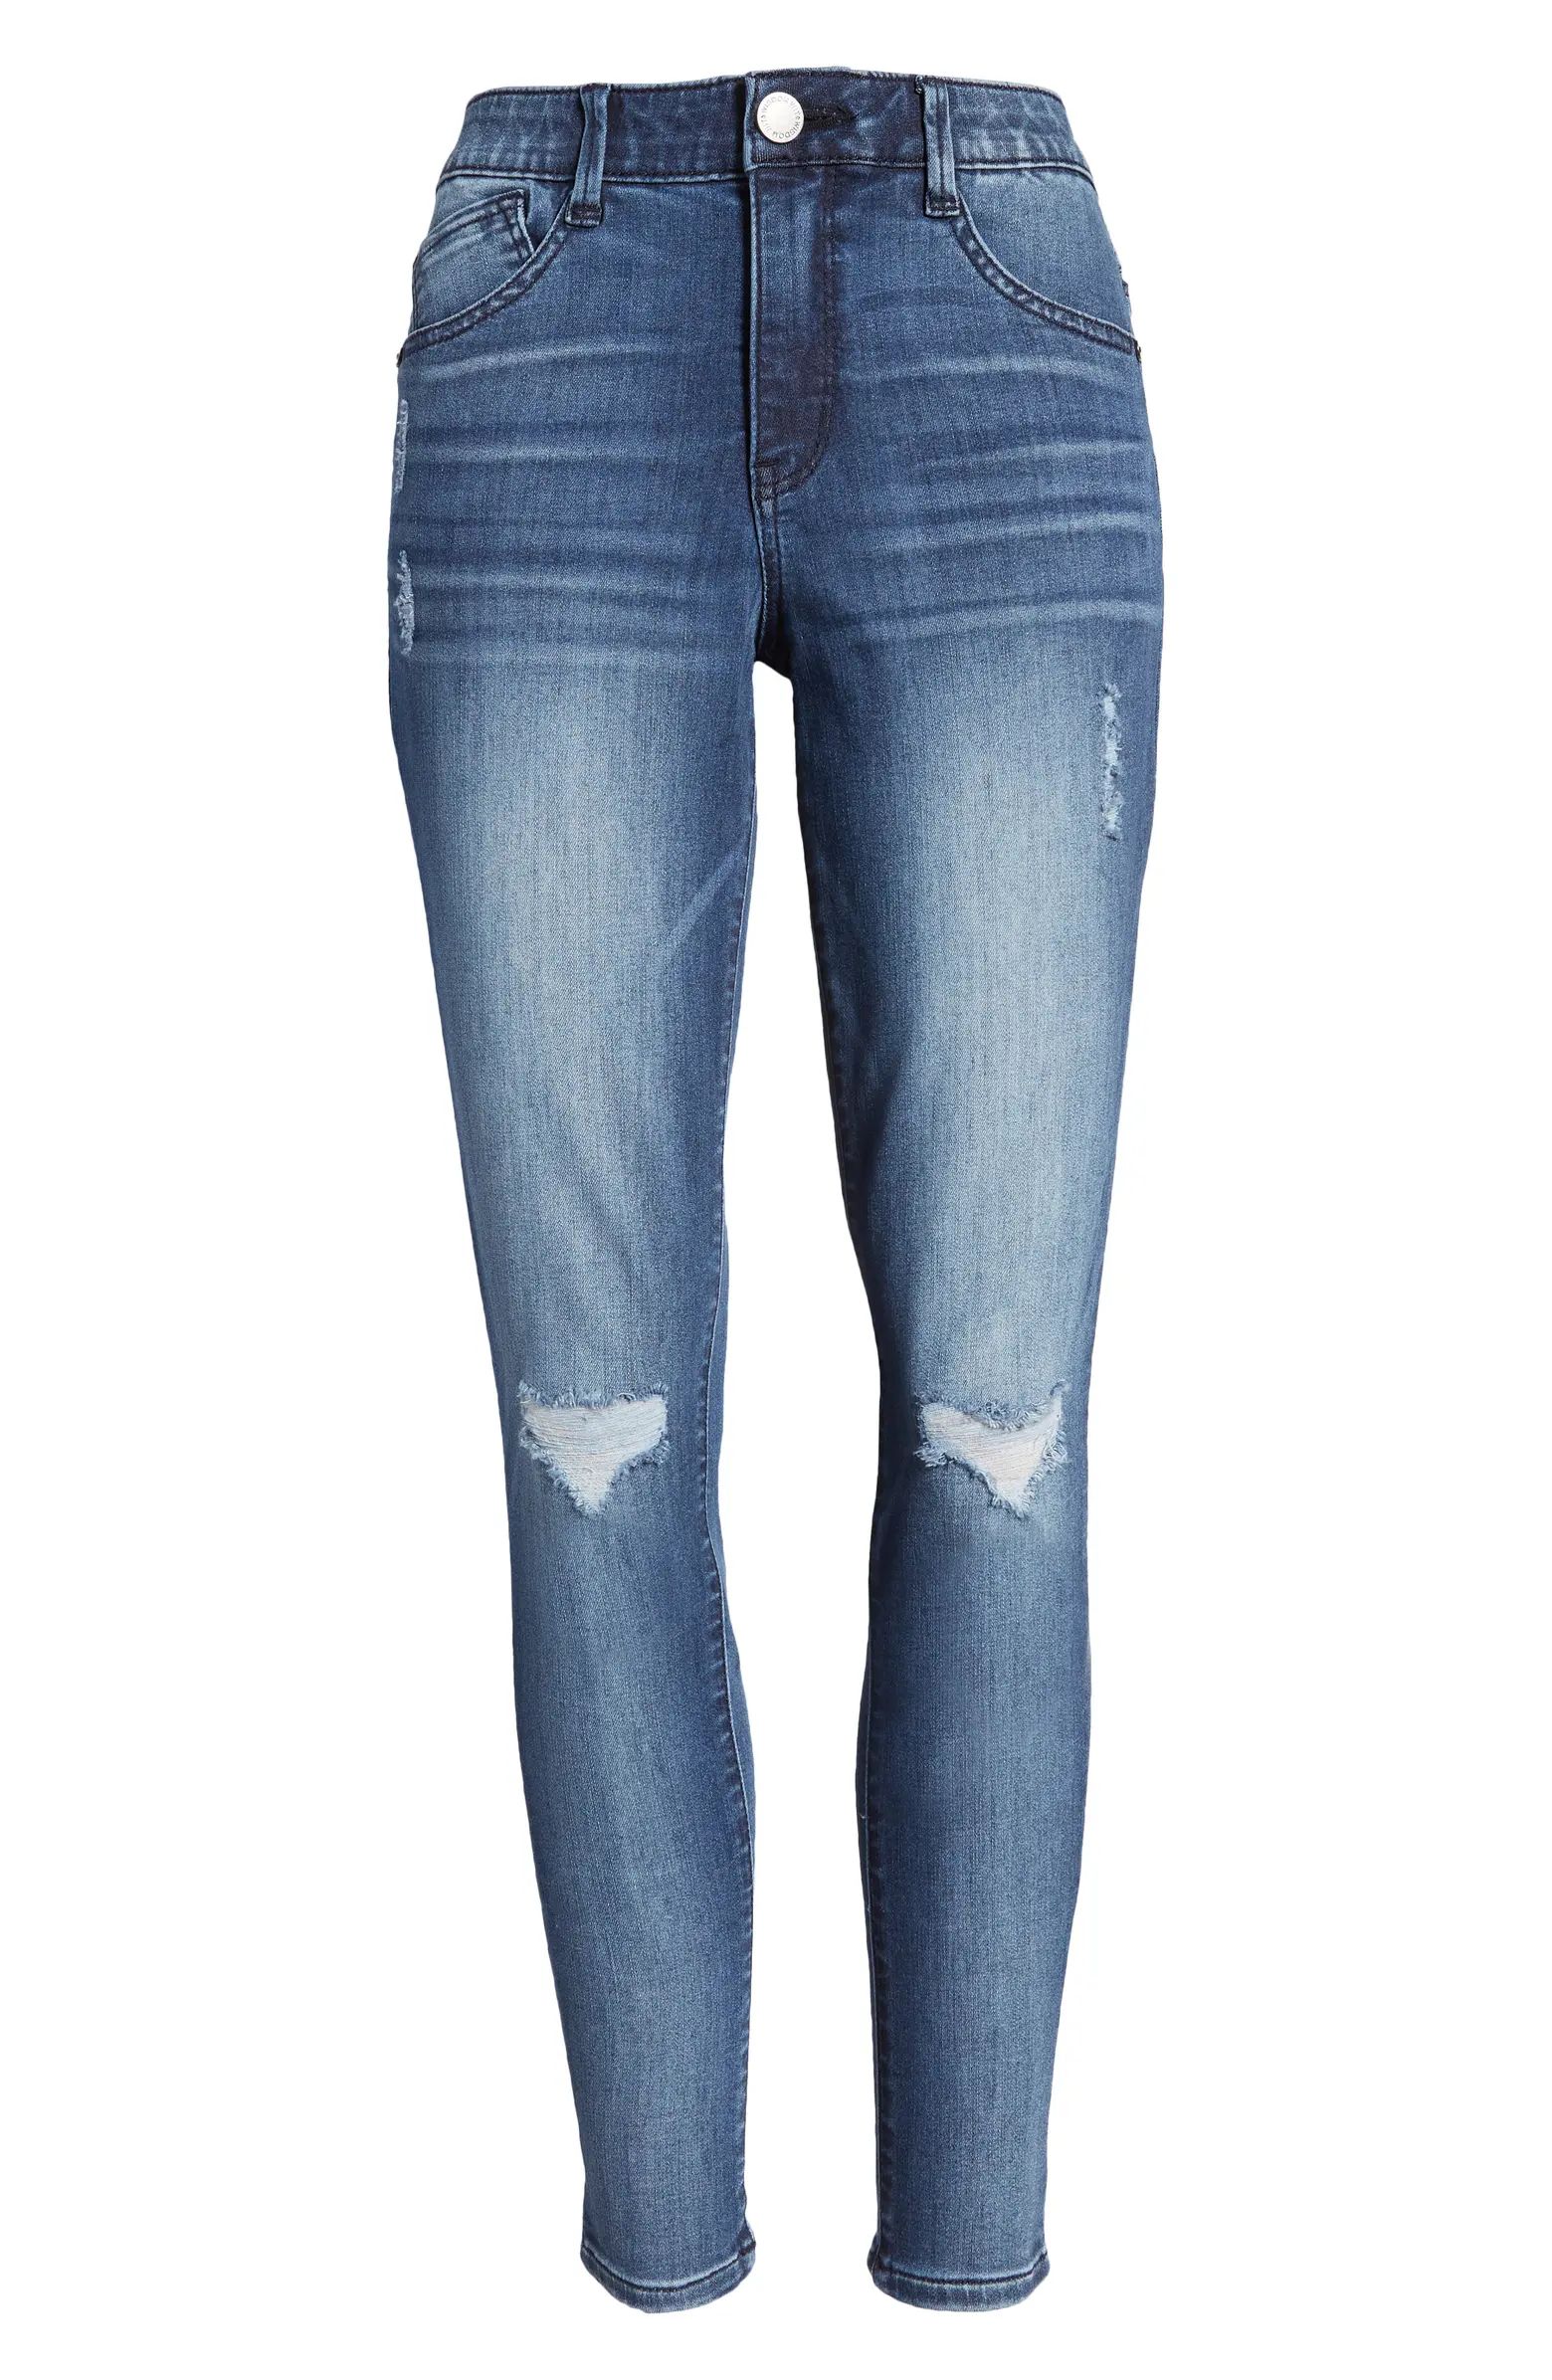 Wit & Wisdom Ripped High Waist Ankle Skinny Jeans | Nordstrom | Nordstrom